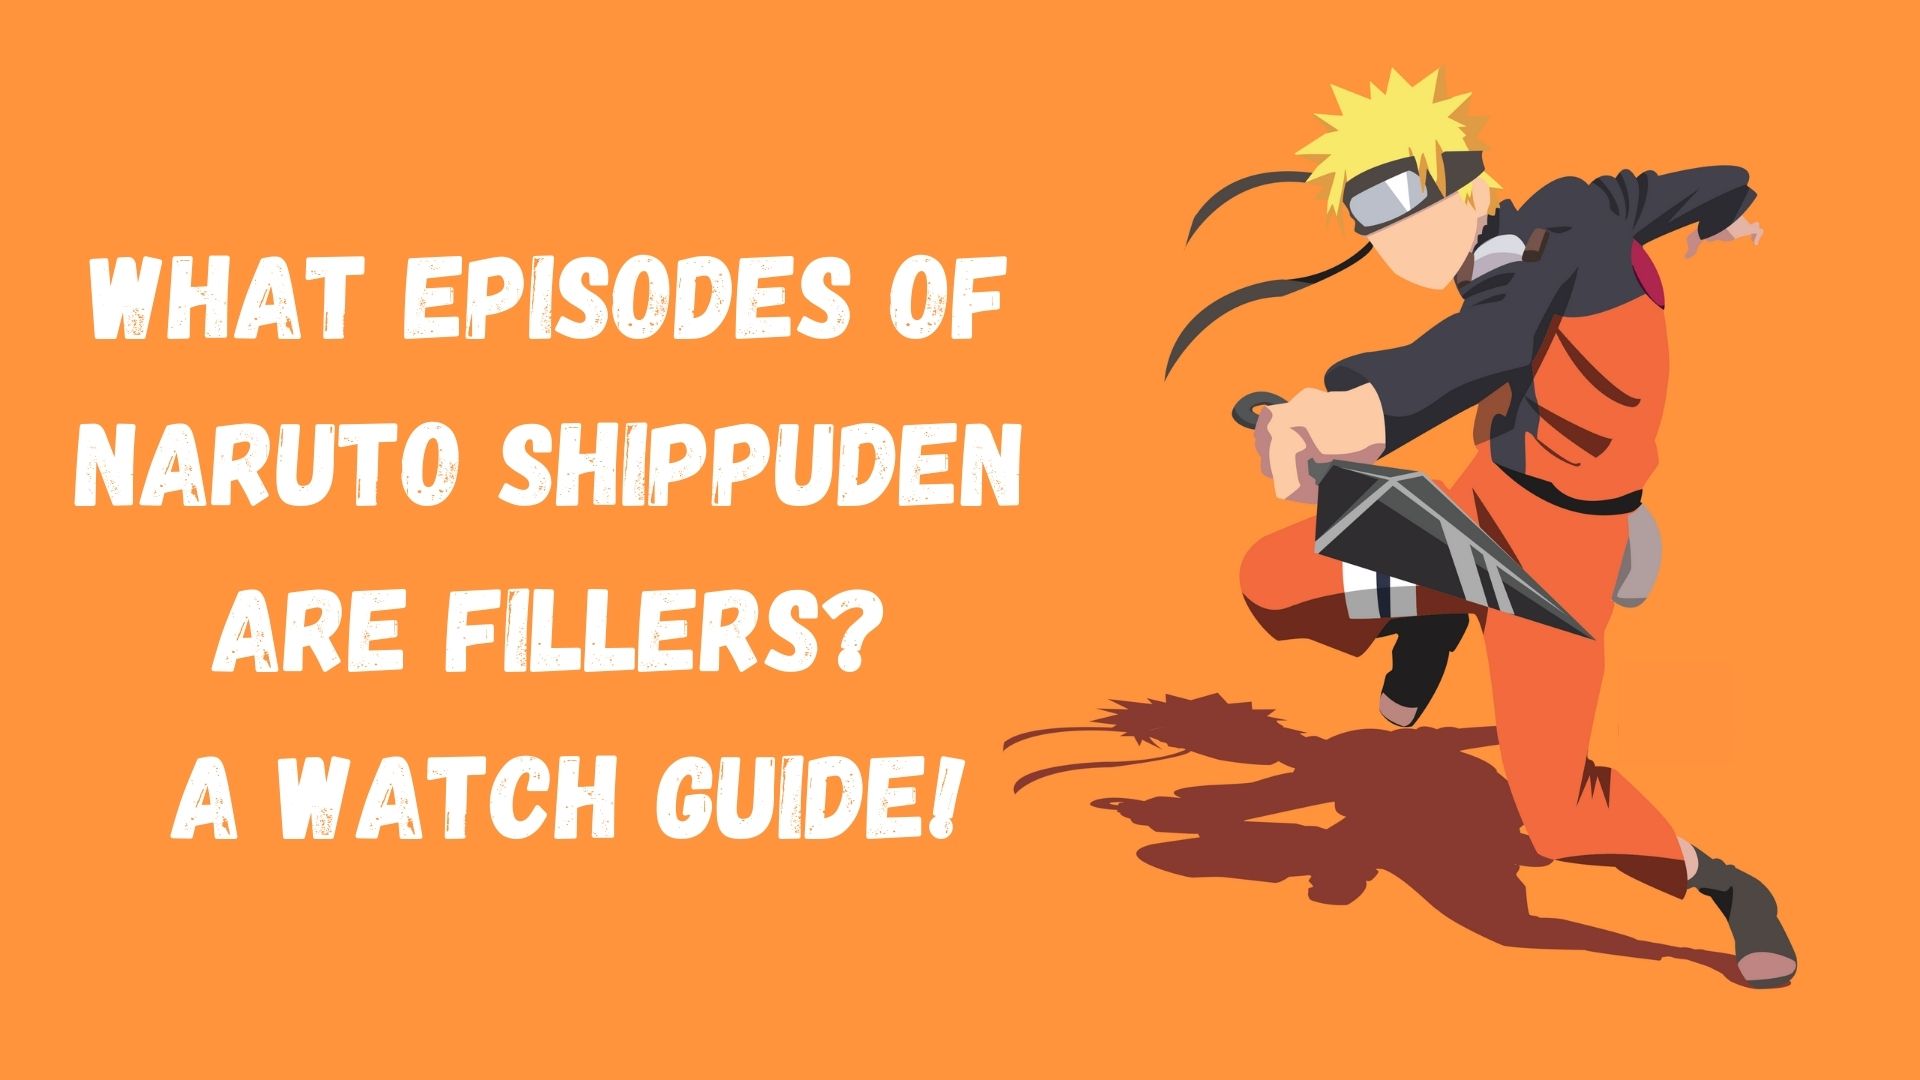 Episodes of Naruto Shippuden Are Fillers, A Watch Guide!